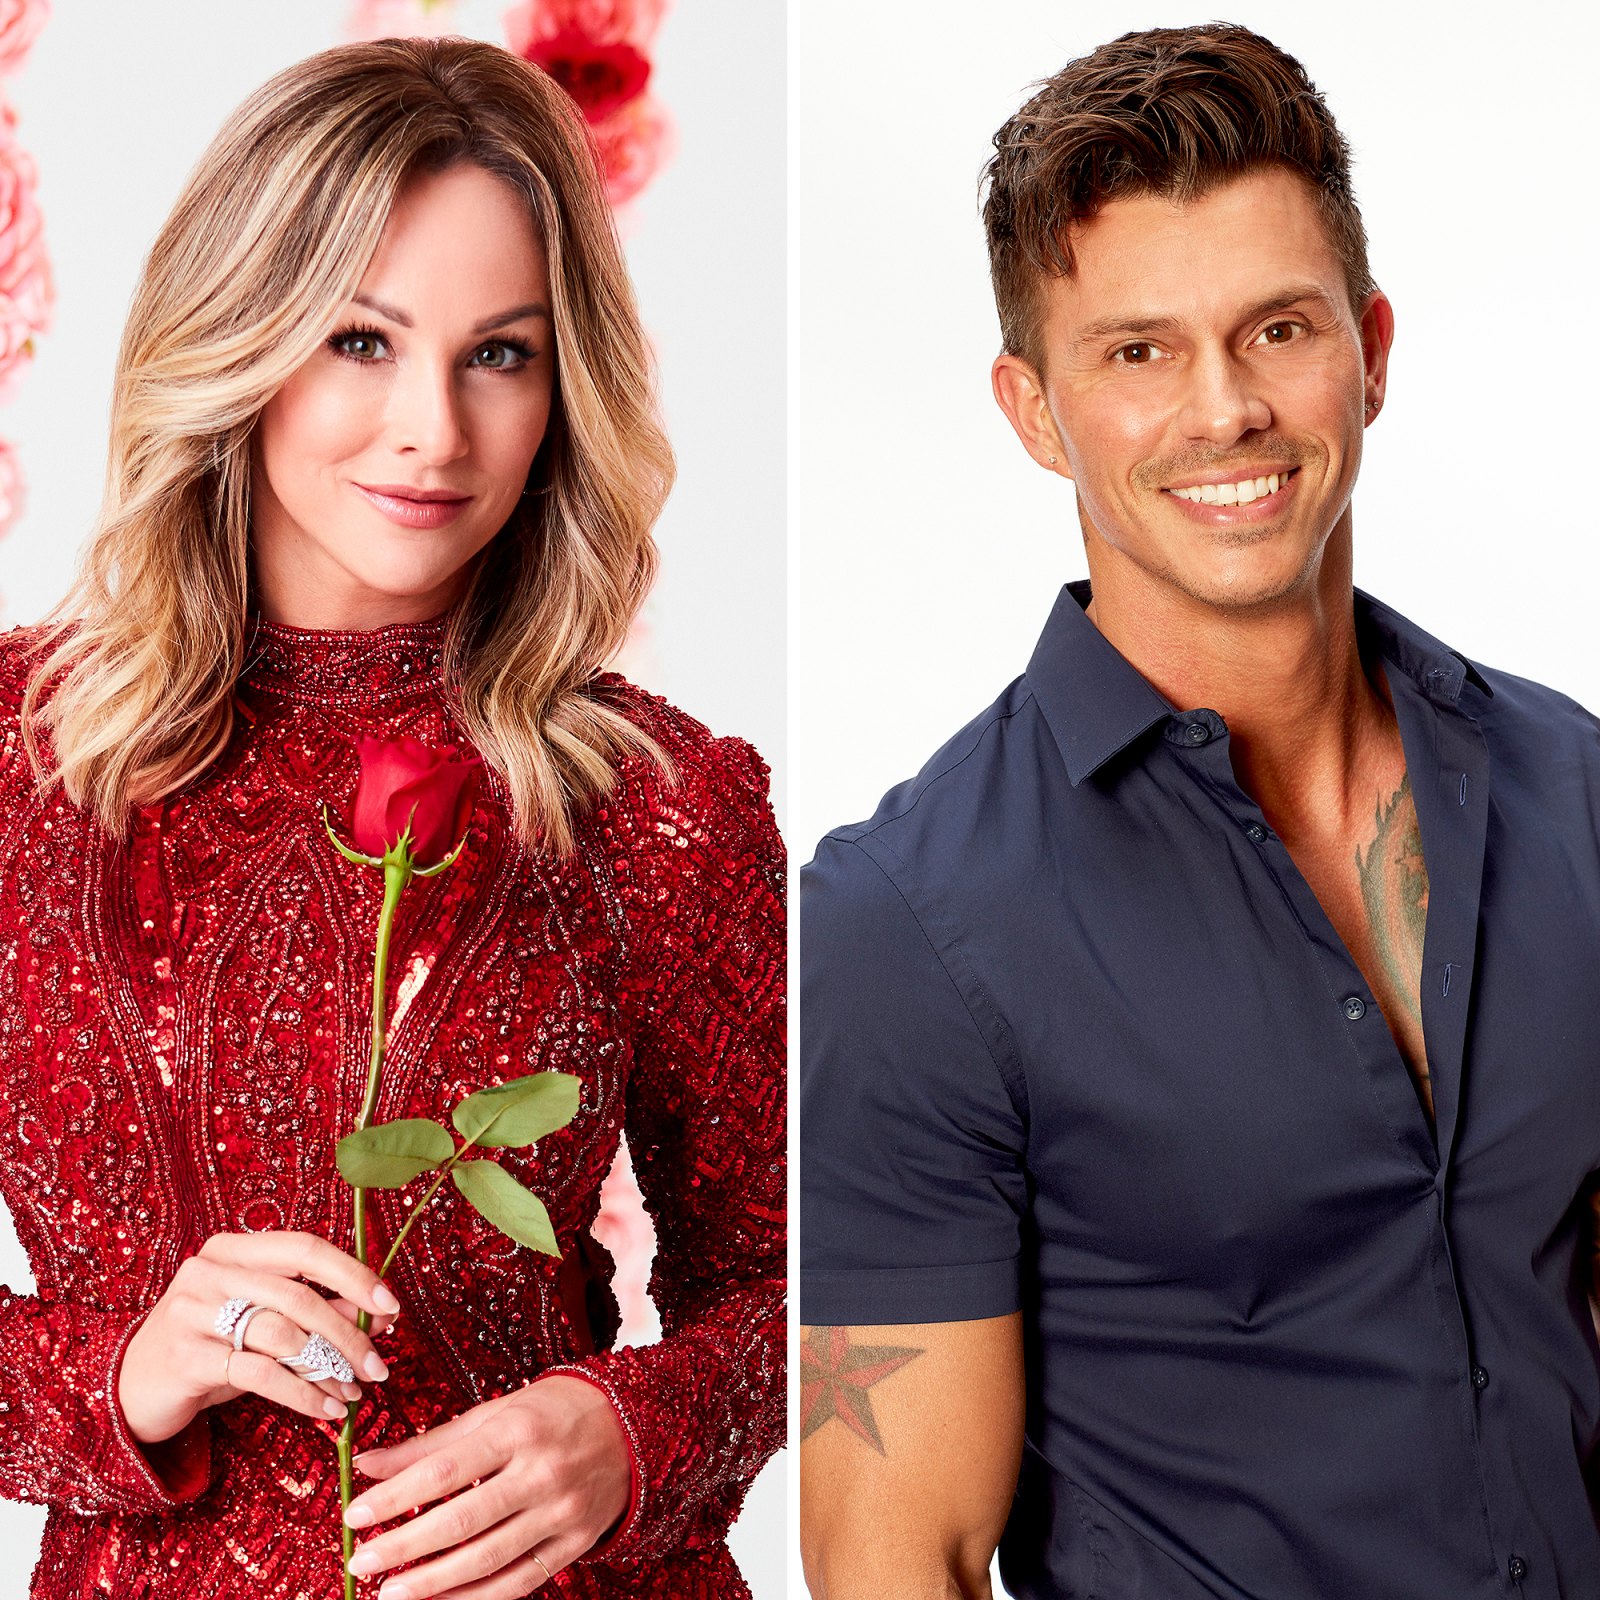 Clare Crawley’s Bachelorette Contestant Kenny Braasch 5 Things to Know